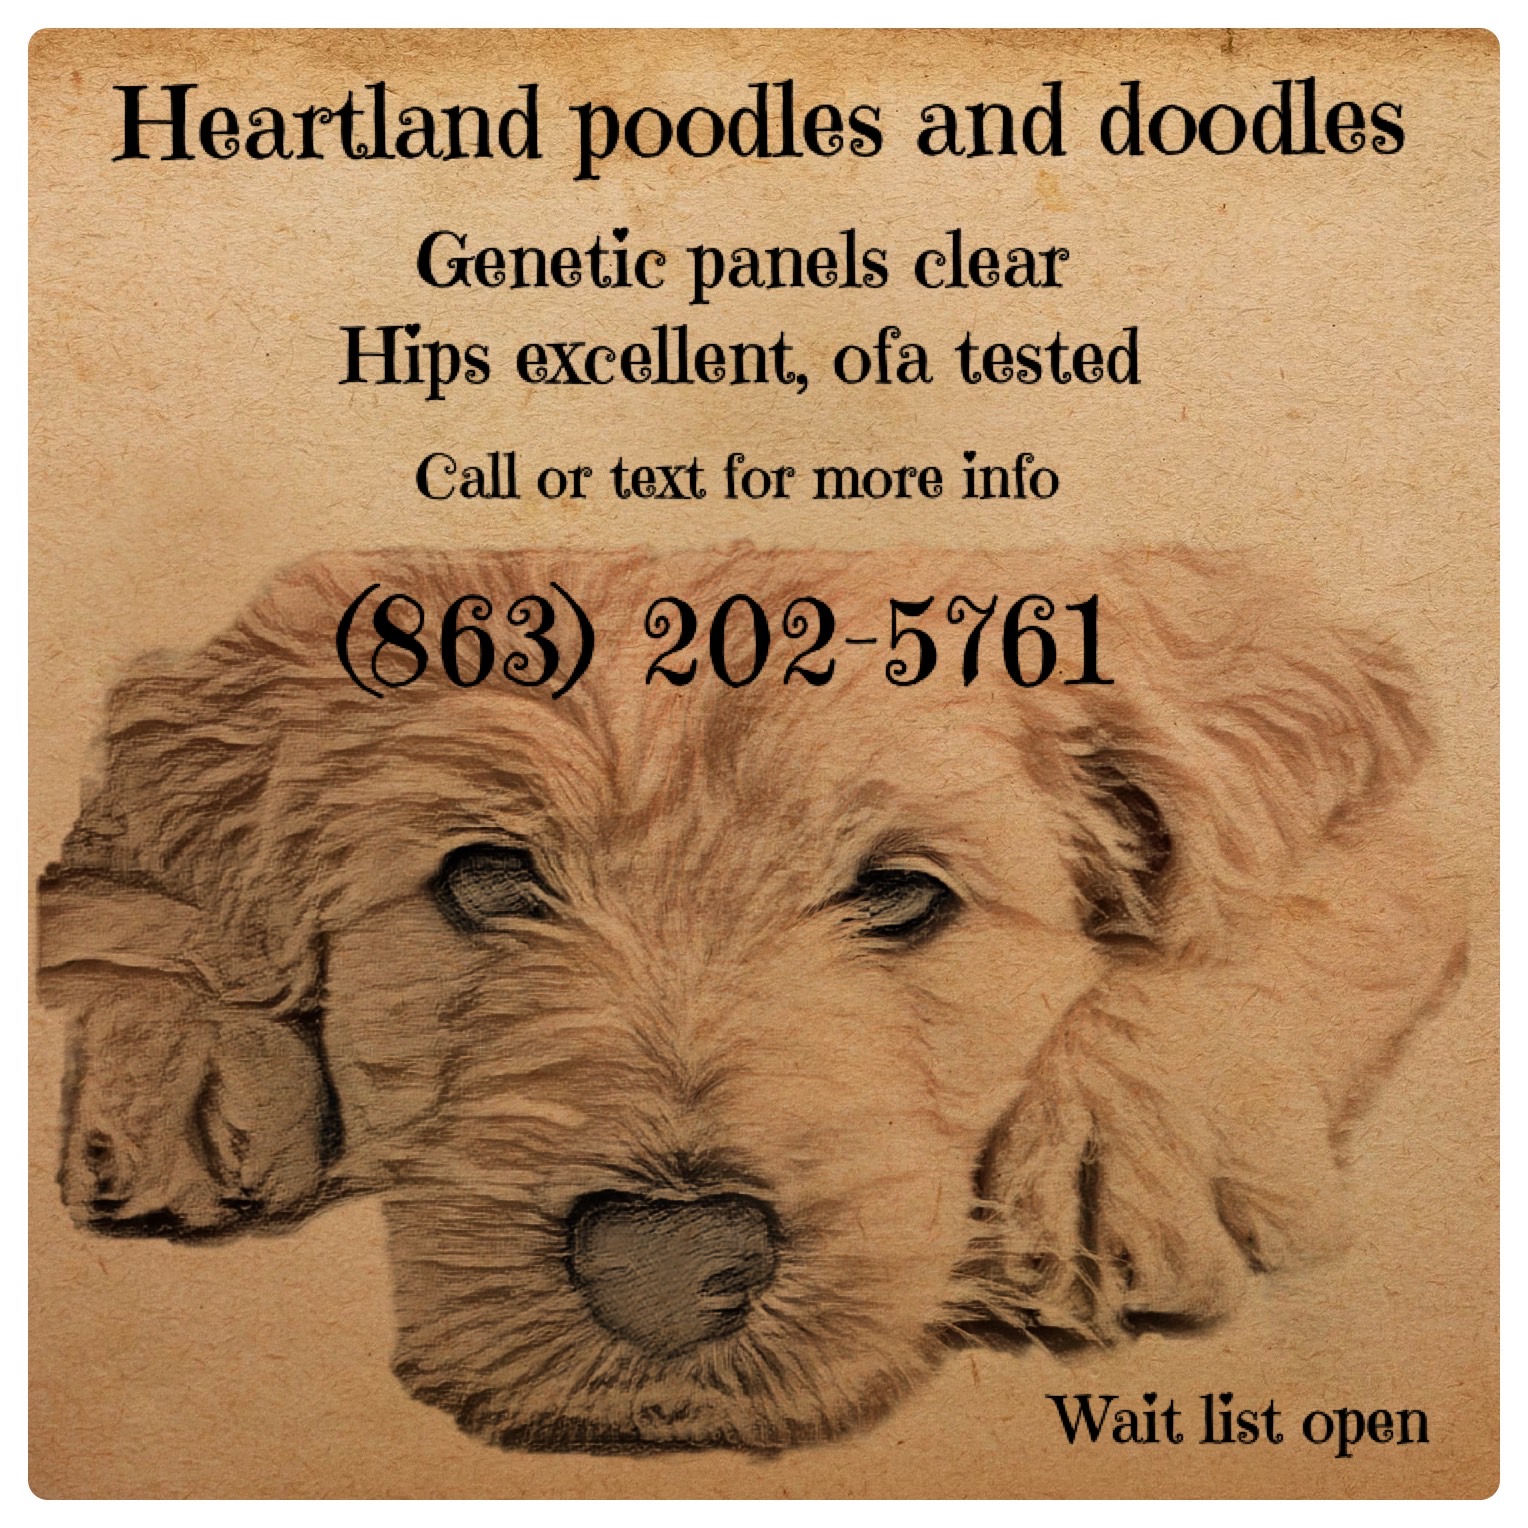 Heartland Poodles and Doodles